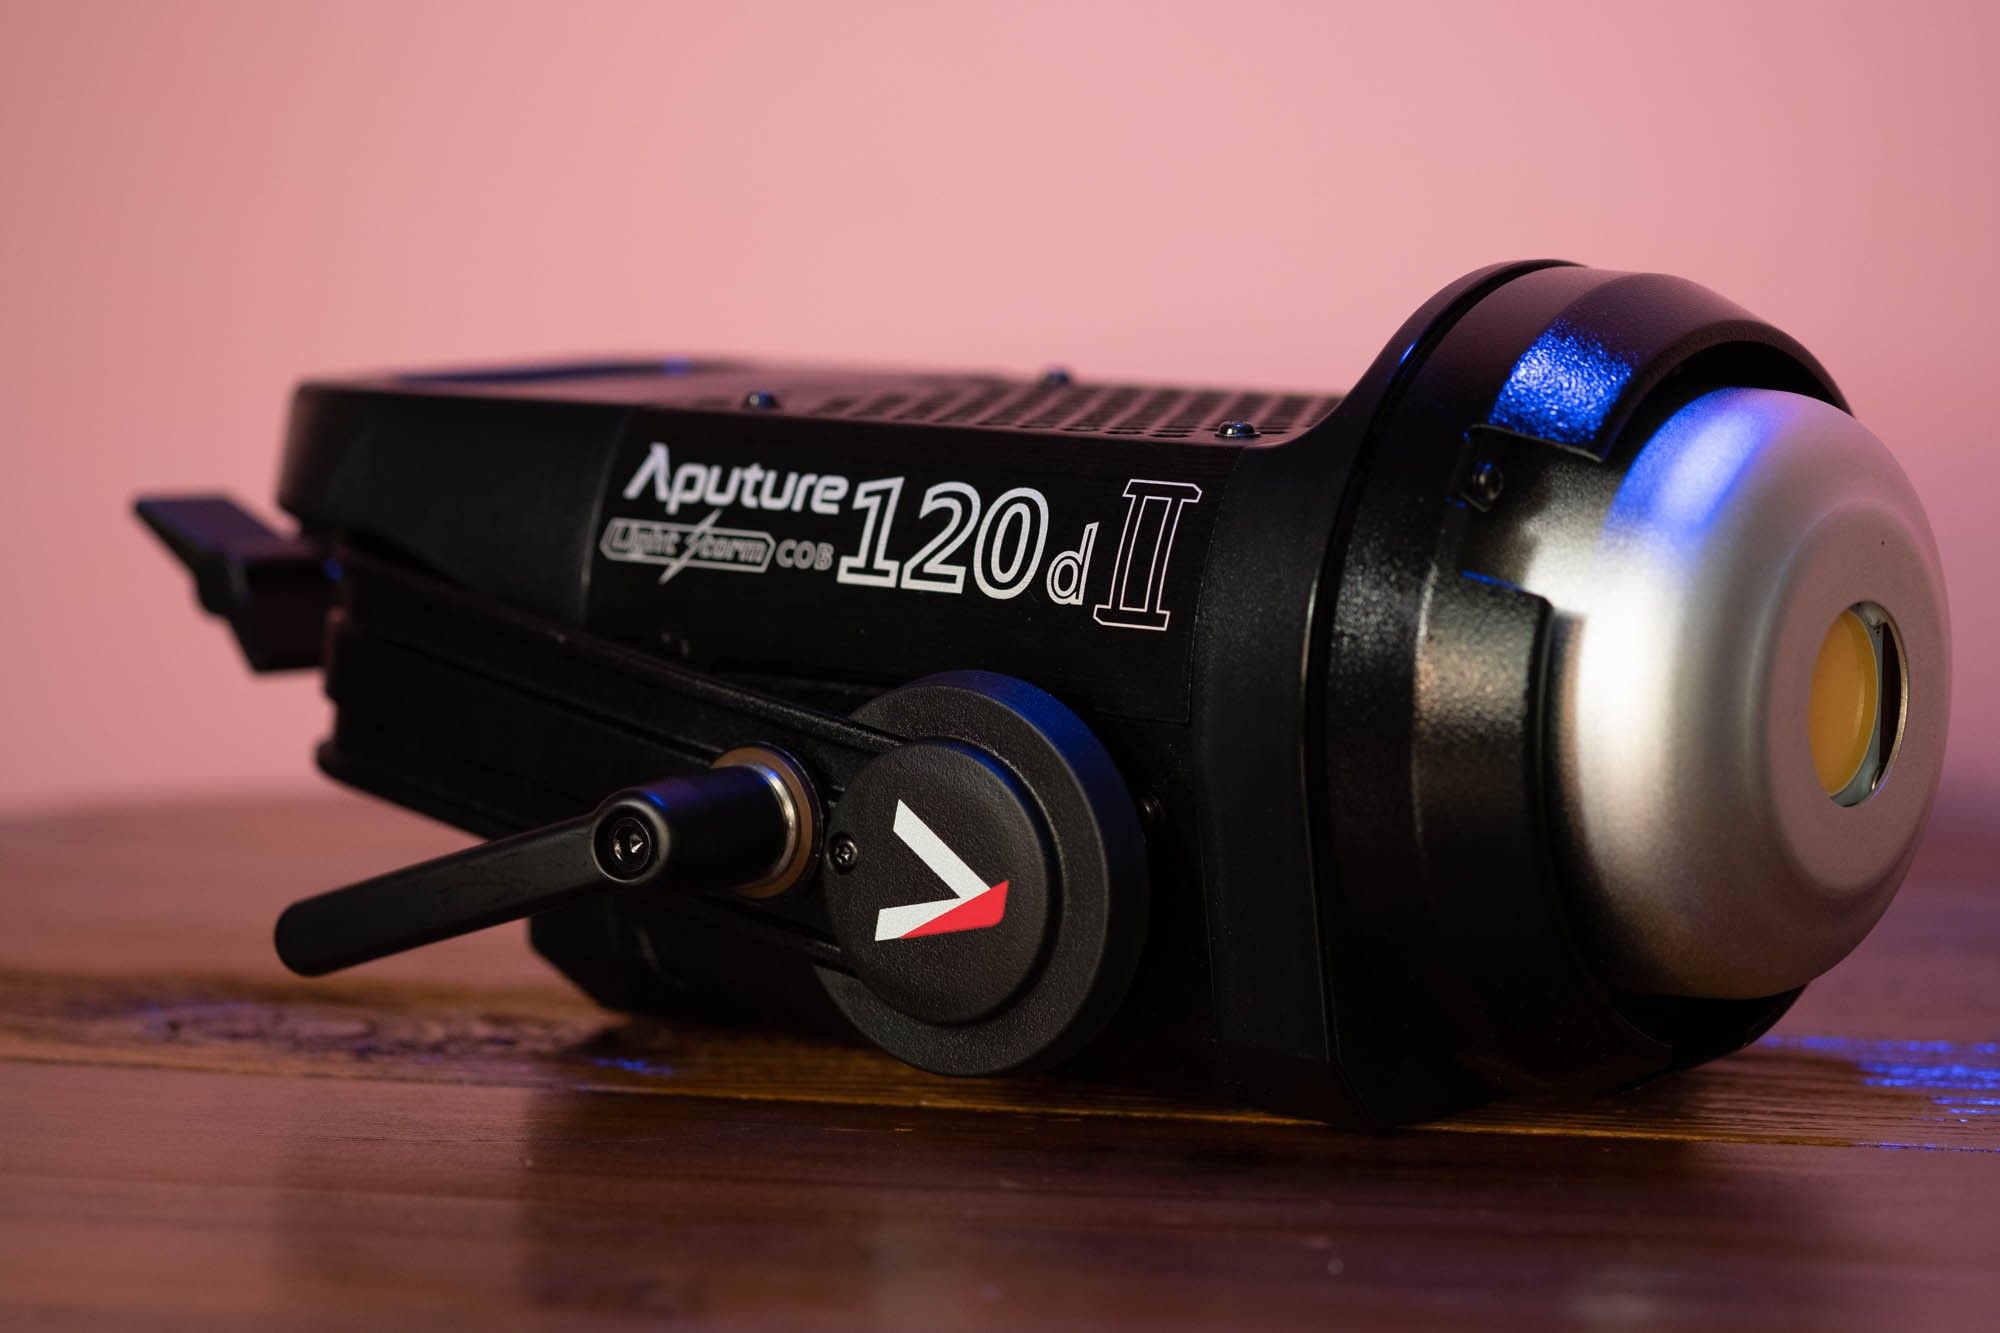 Aputure Ships the 120d Mark II with Improved Yoke Mount to Keep Your